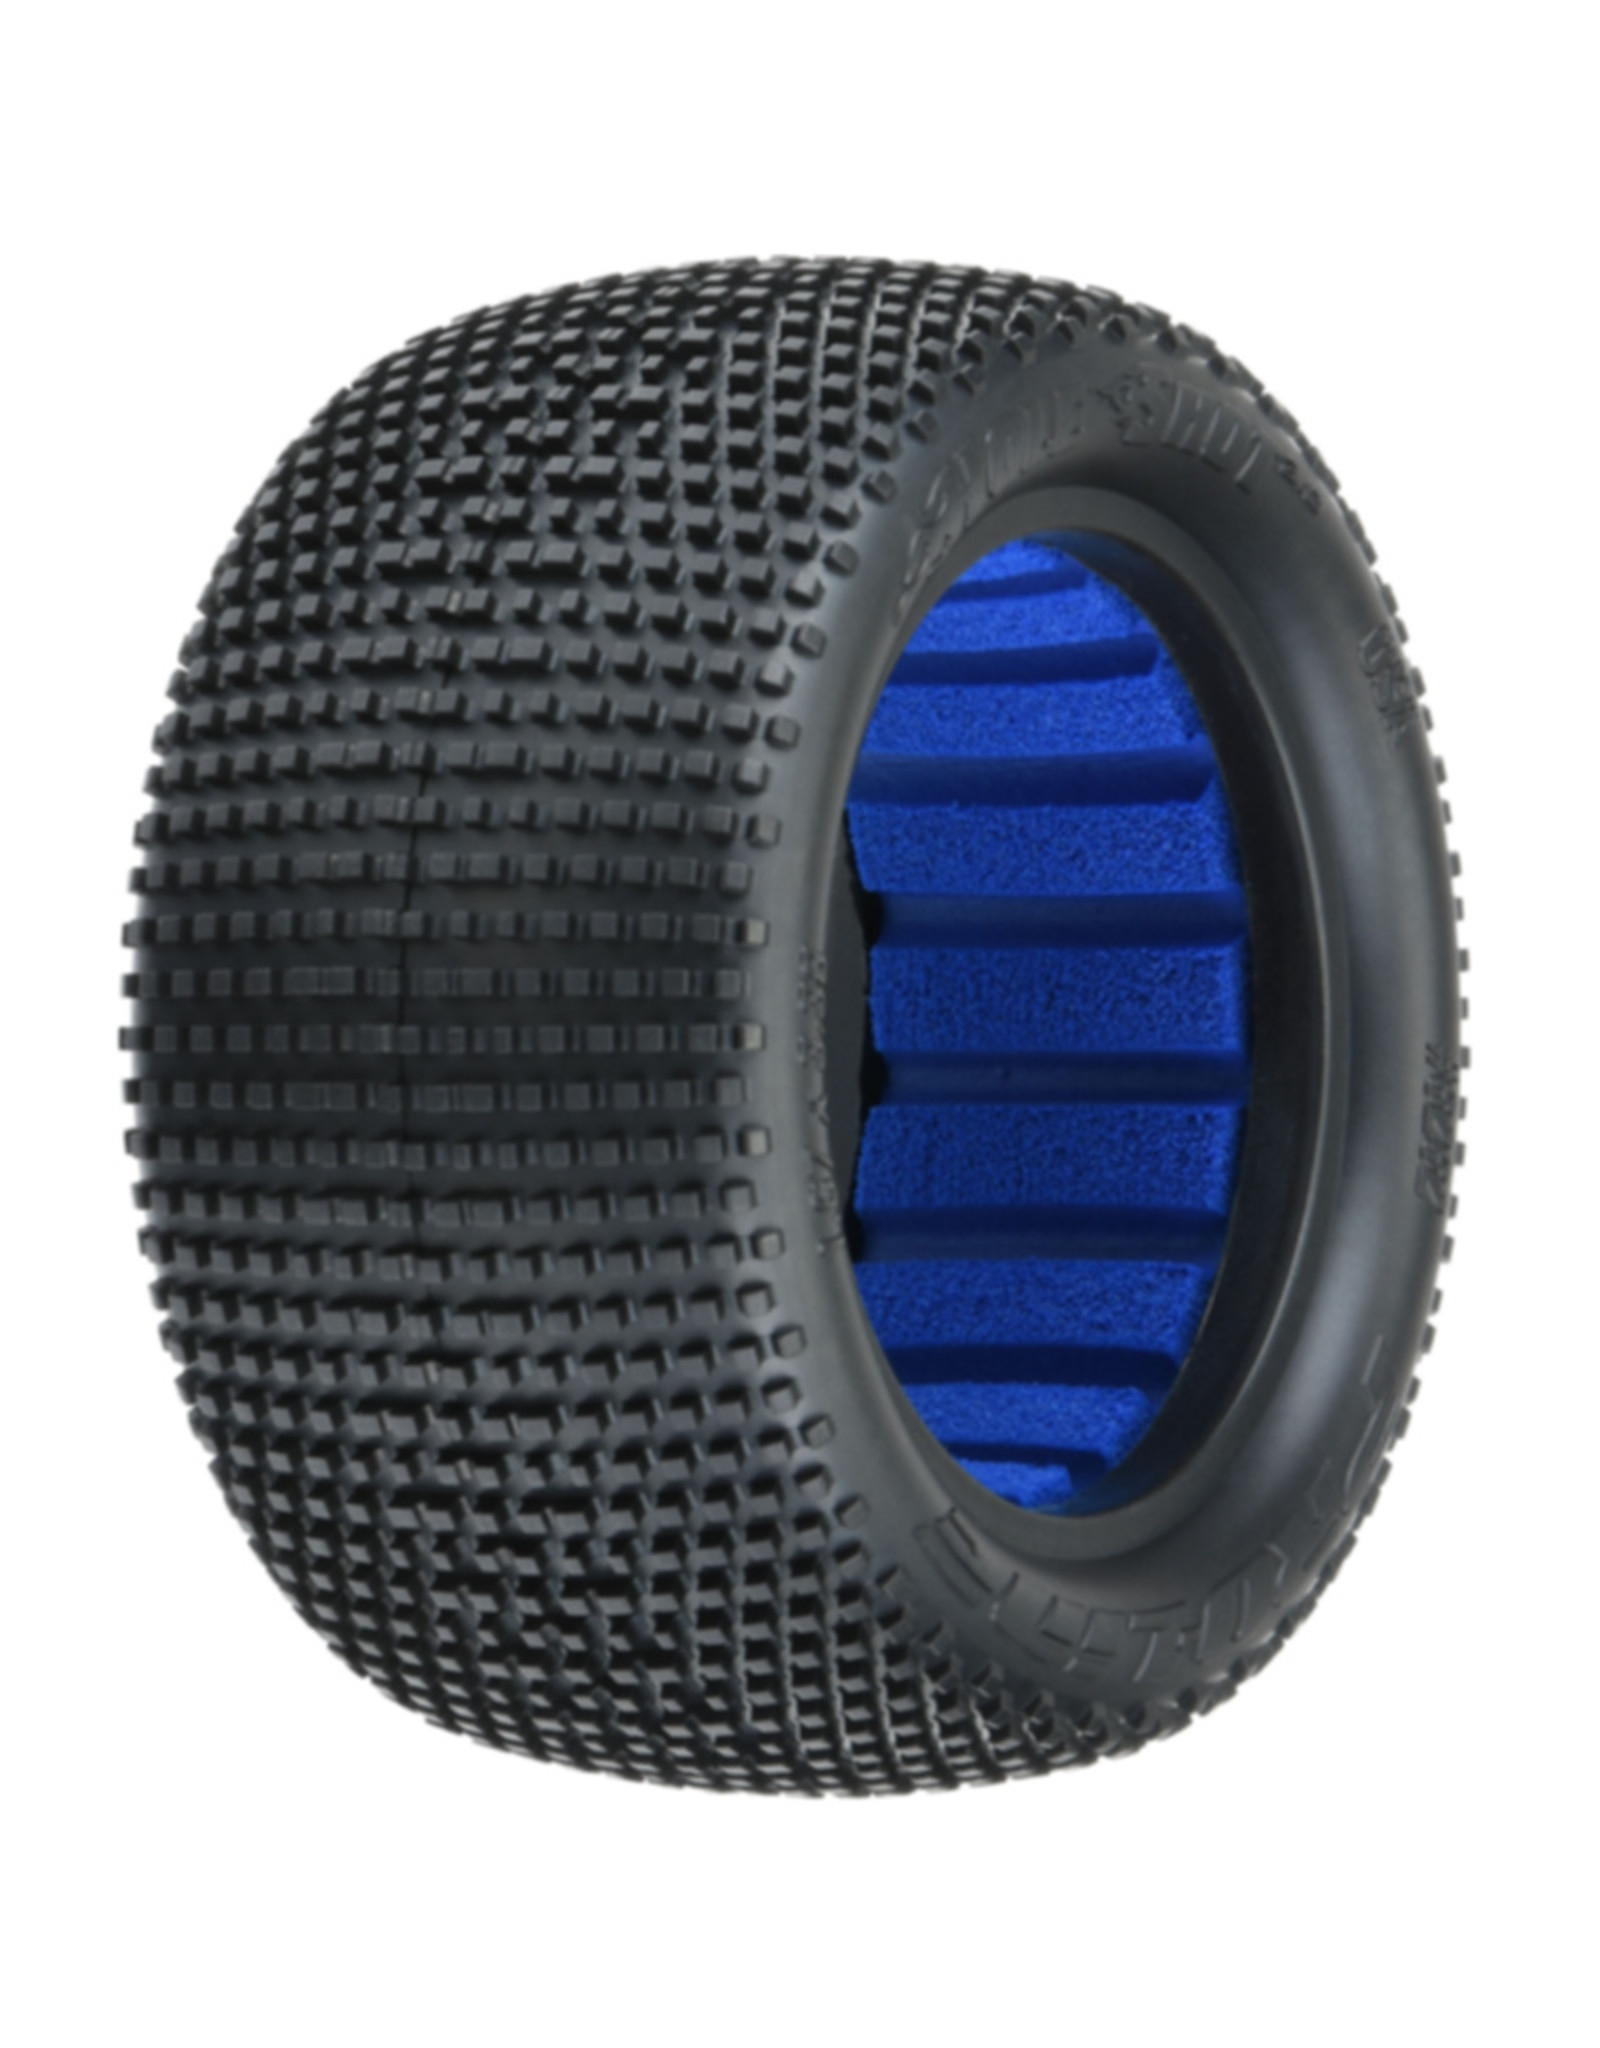 Pro-Line Racing PRO828202 Hole Shot 3.0 2.2" M3 Buggy Rear Tires